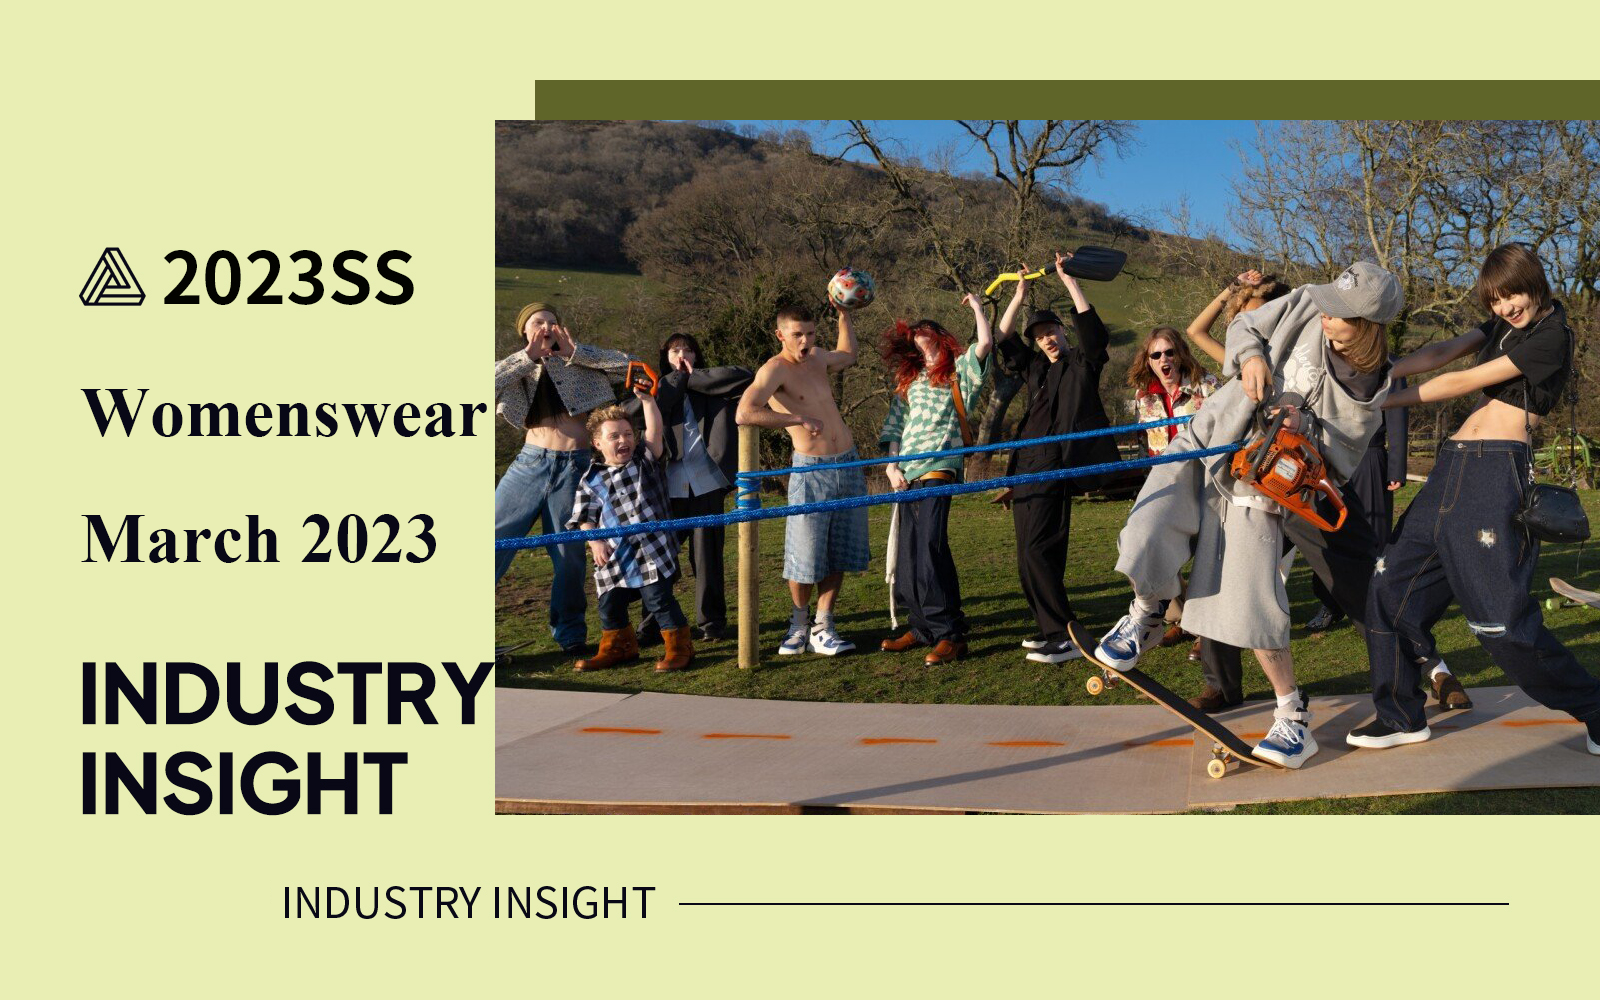 March 2023 -- The Industry Insight of Womenswear